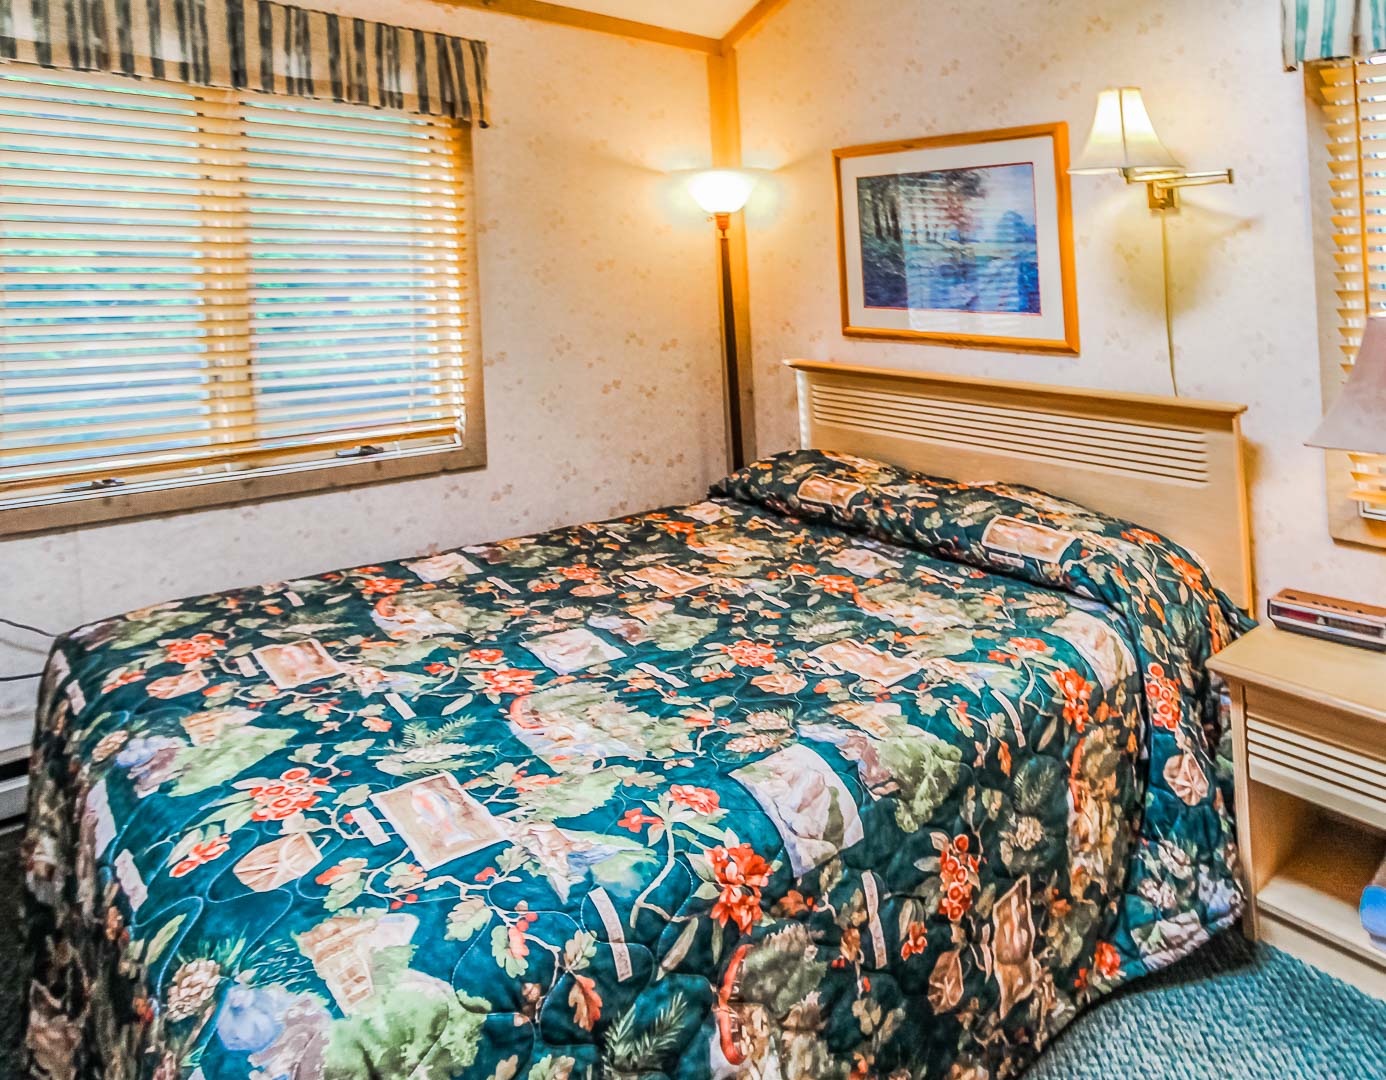 A charming queen size bed at VRI's Smoketree lodge in North Carolina.